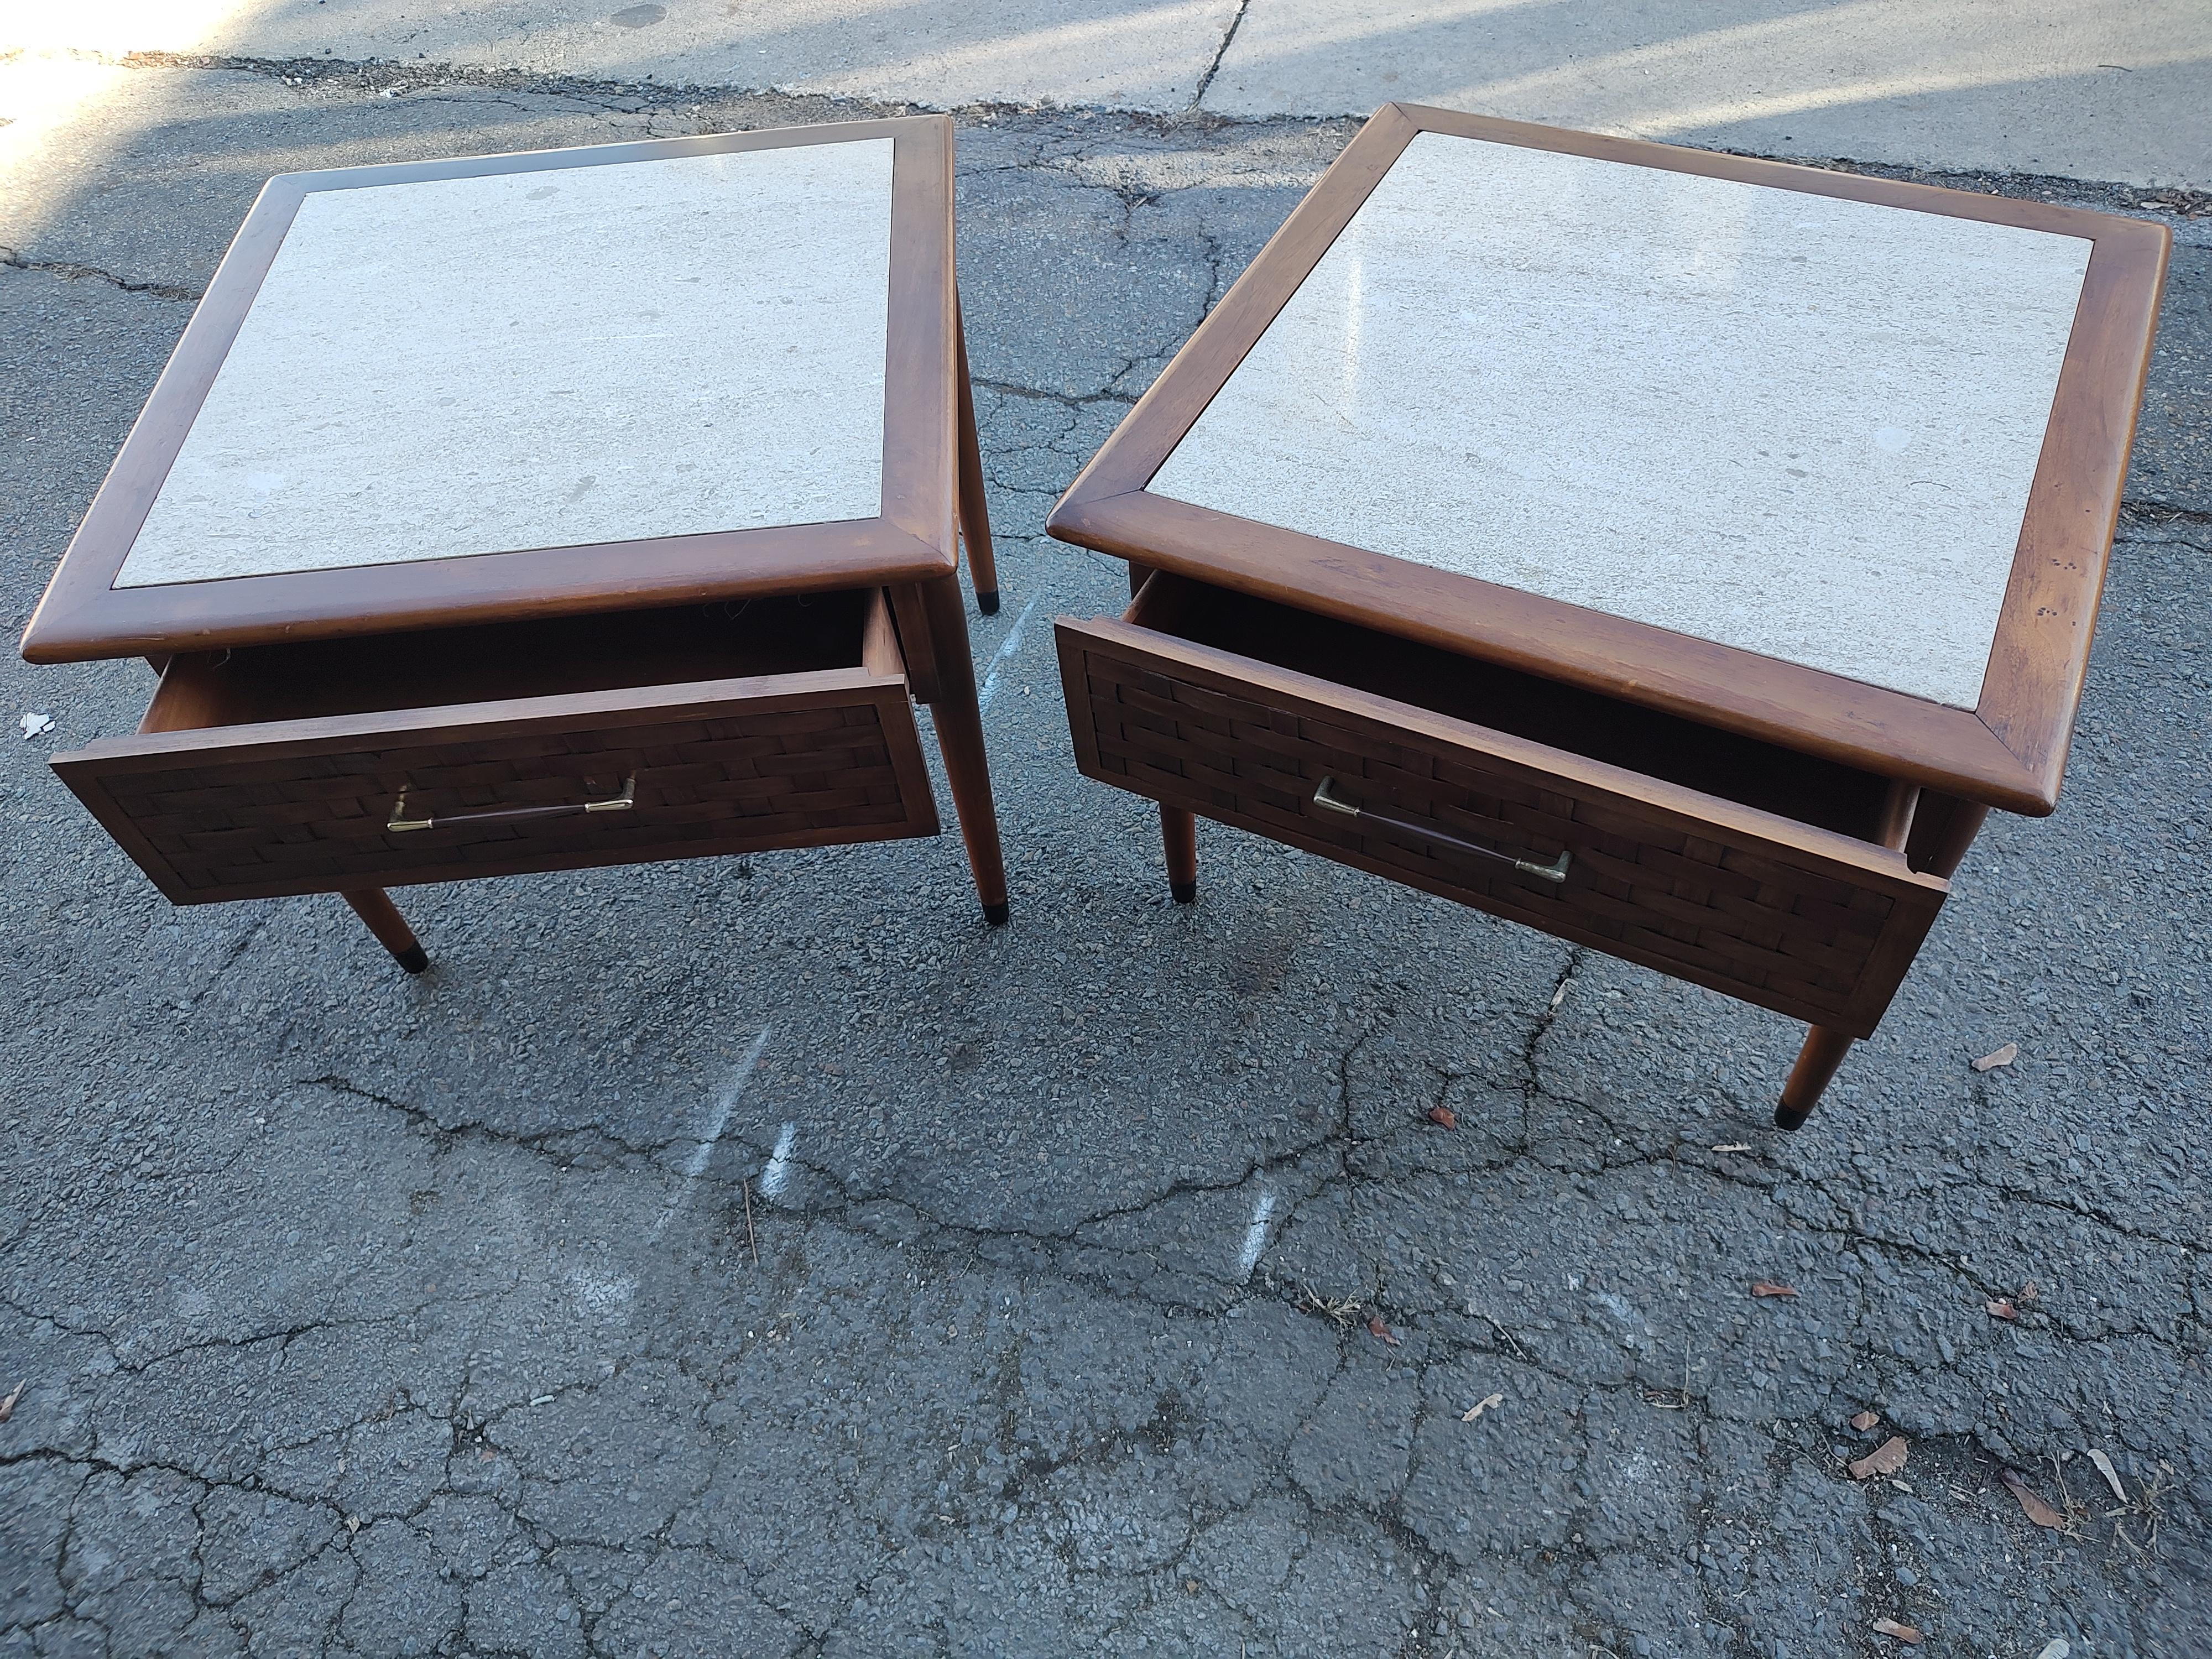 Pair of Mid Century Modern Lane Perception End Tables with Travertine Tops C1960 For Sale 5